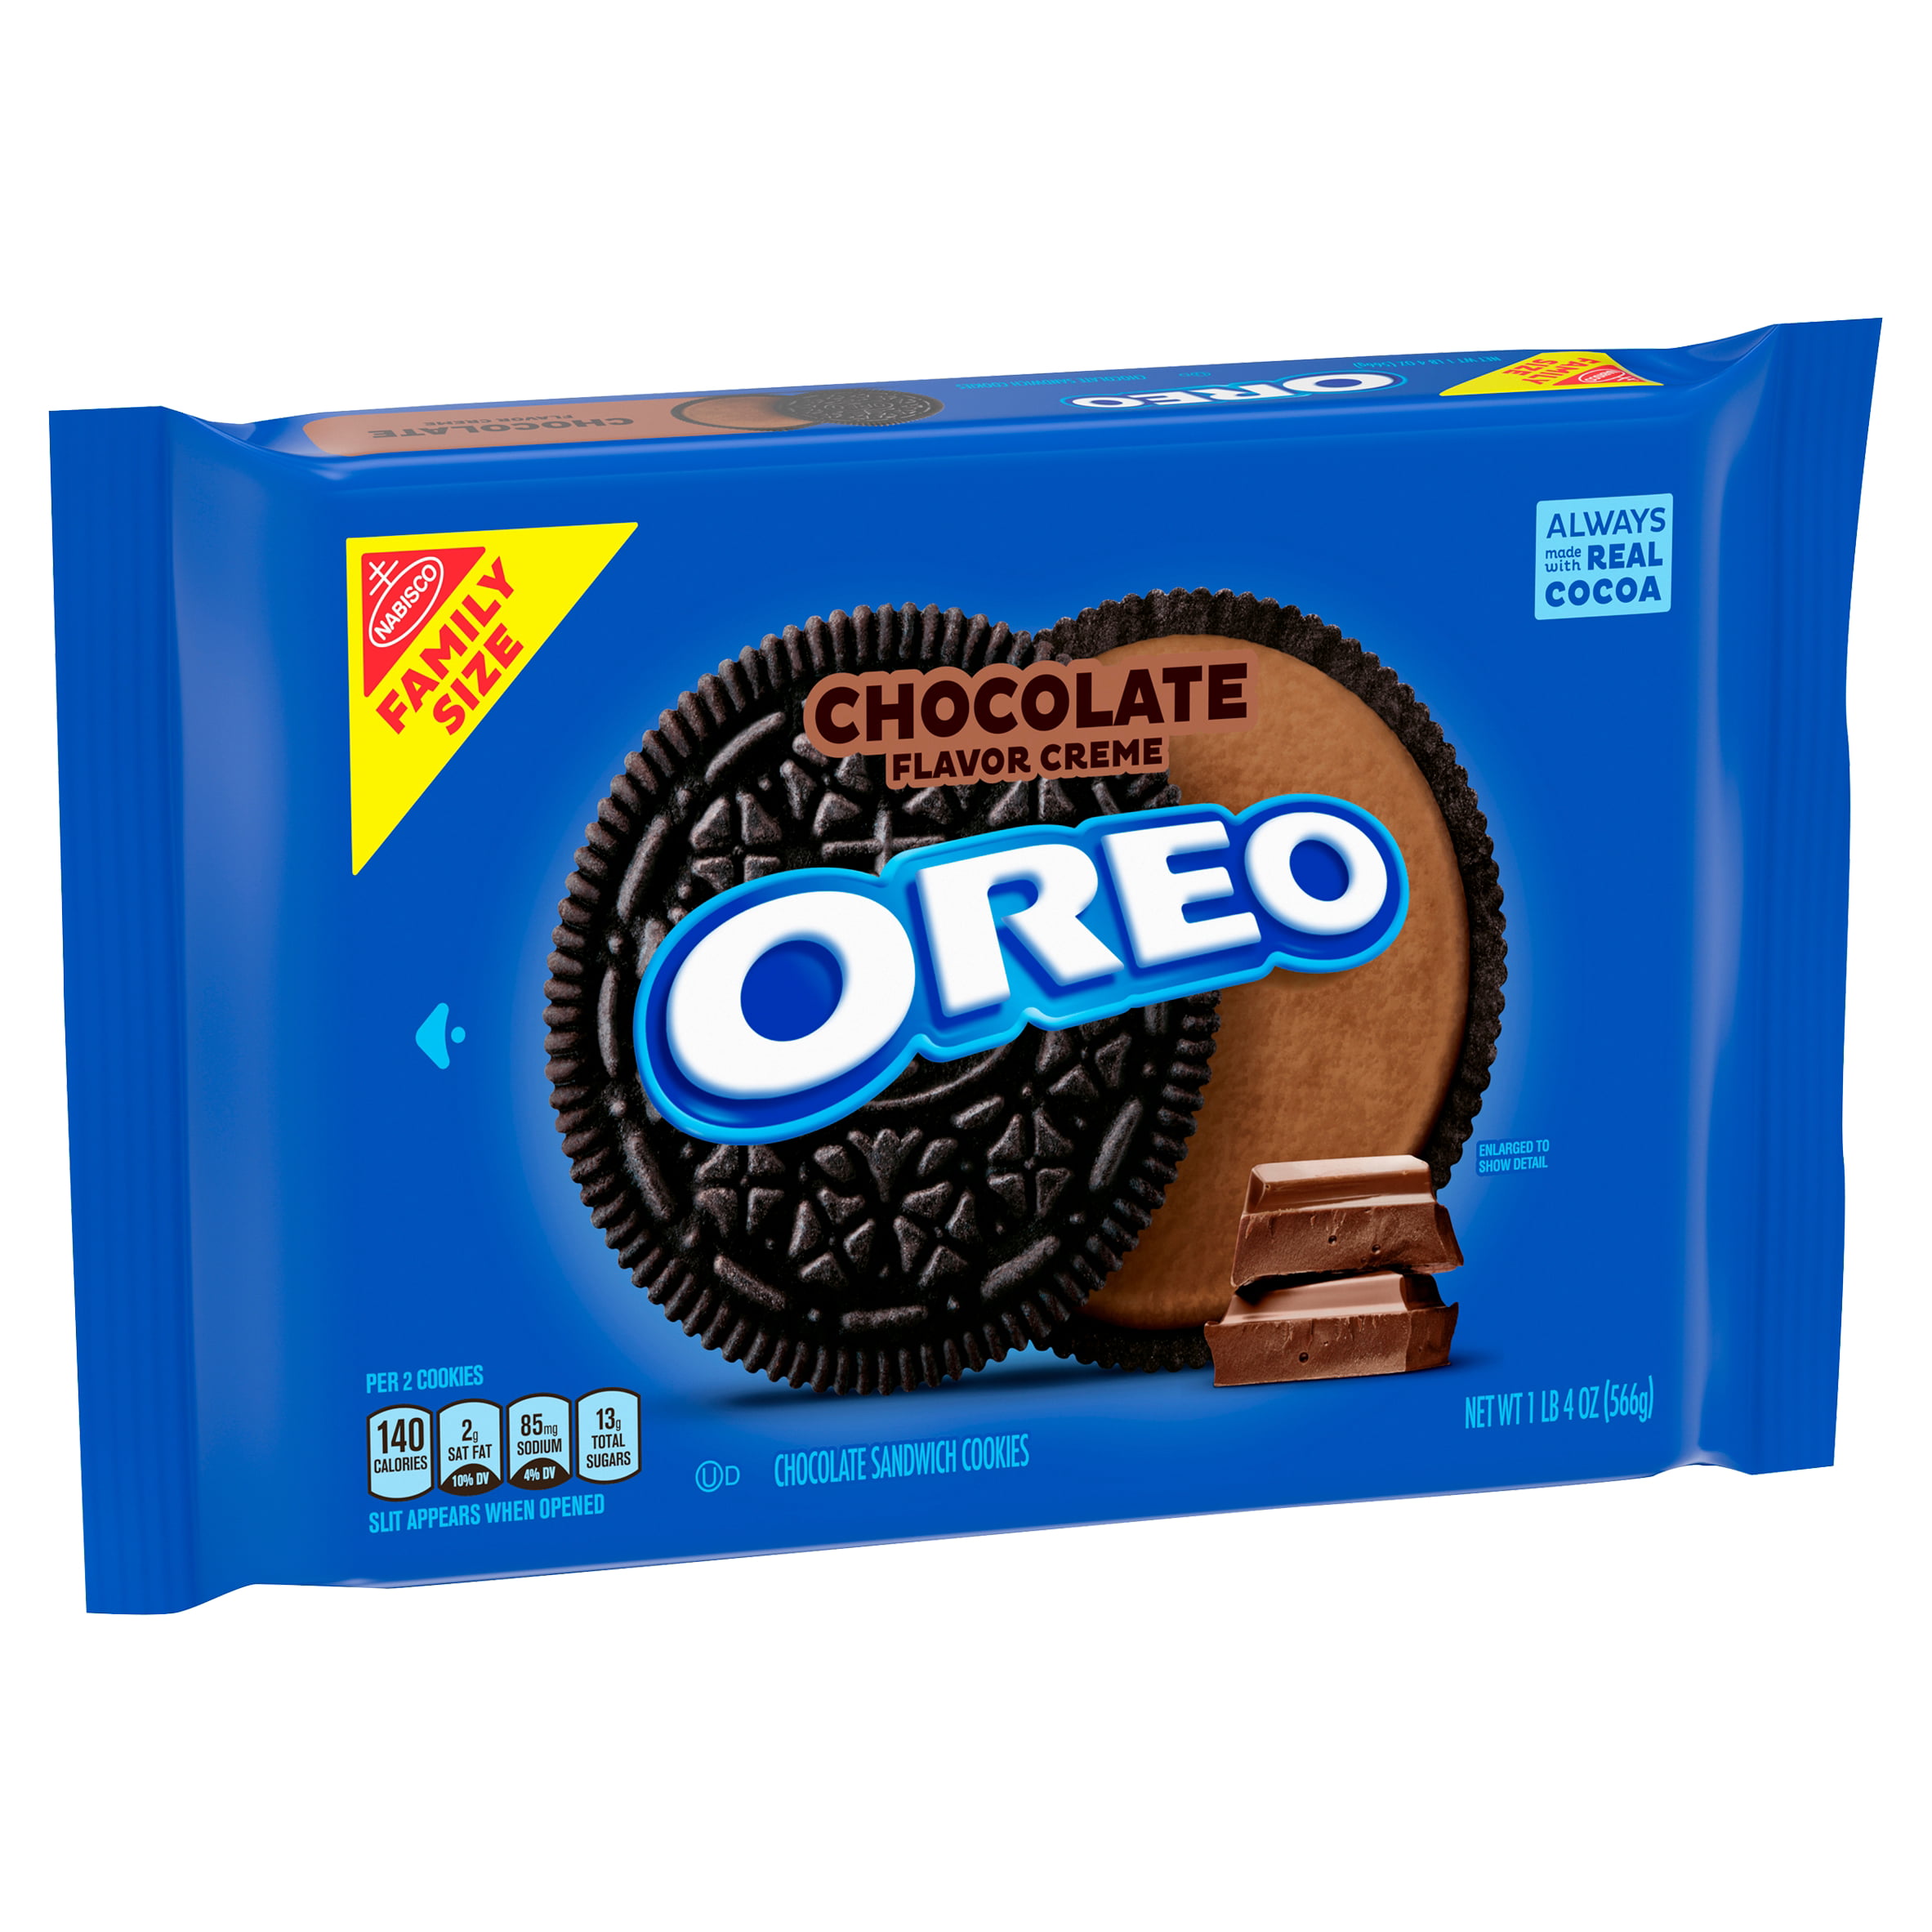 OREO Chocolate Flavored Creme Chocolate Sandwich Cookies, Family Size ...